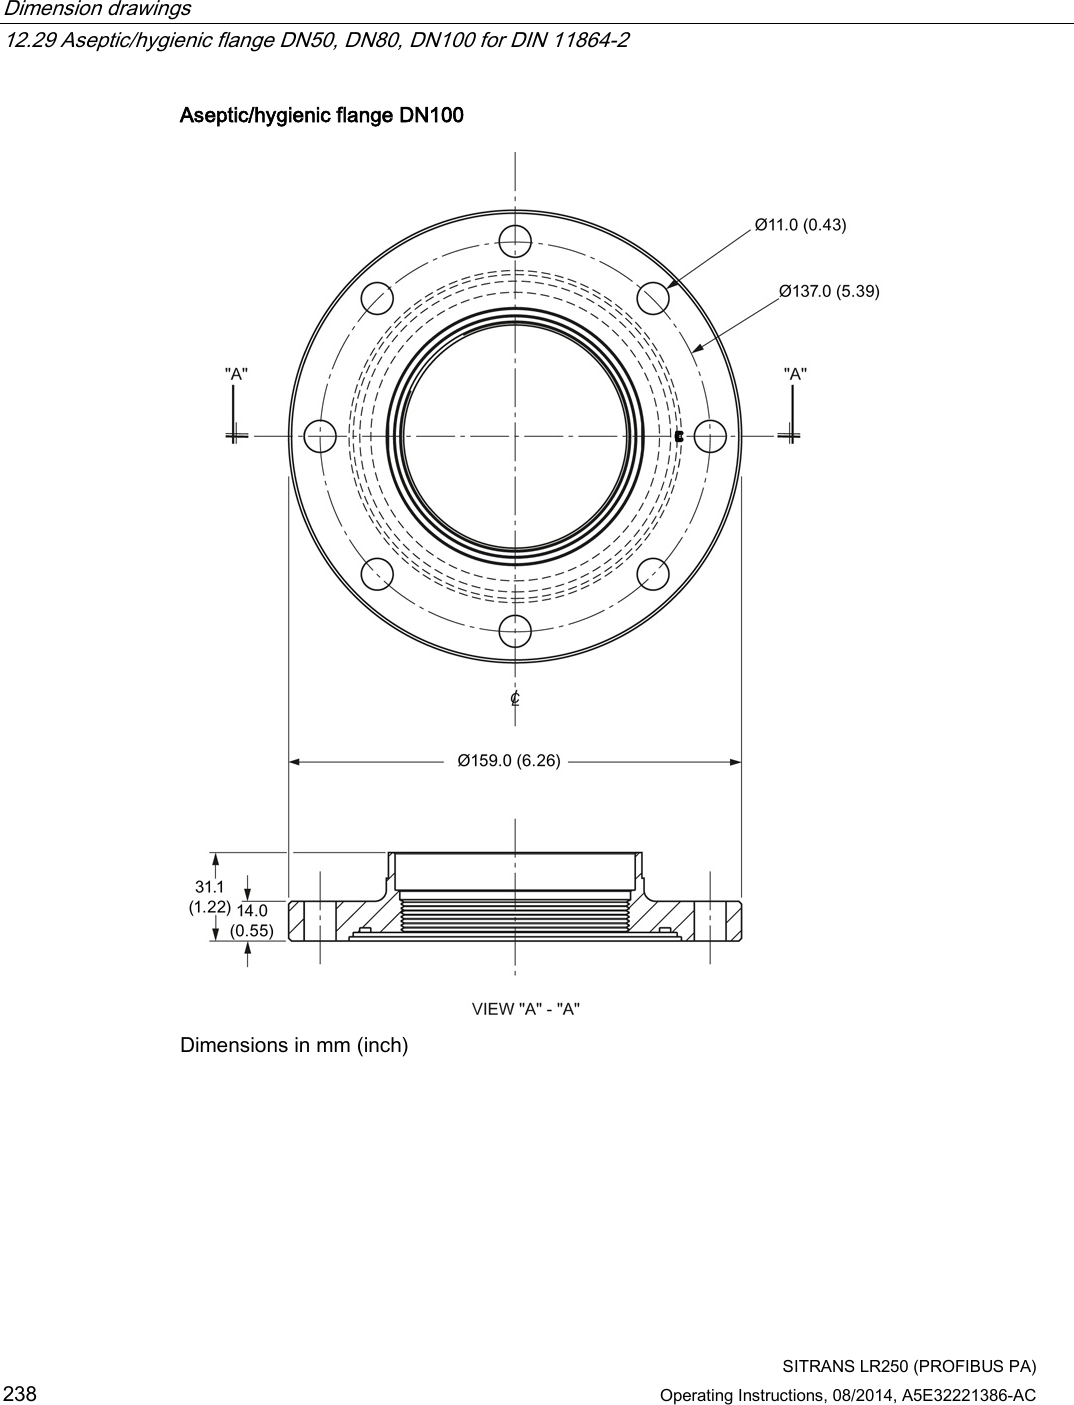 Dimension drawings   12.29 Aseptic/hygienic flange DN50, DN80, DN100 for DIN 11864-2  SITRANS LR250 (PROFIBUS PA) 238 Operating Instructions, 08/2014, A5E32221386-AC Aseptic/hygienic flange DN100  Dimensions in mm (inch) 